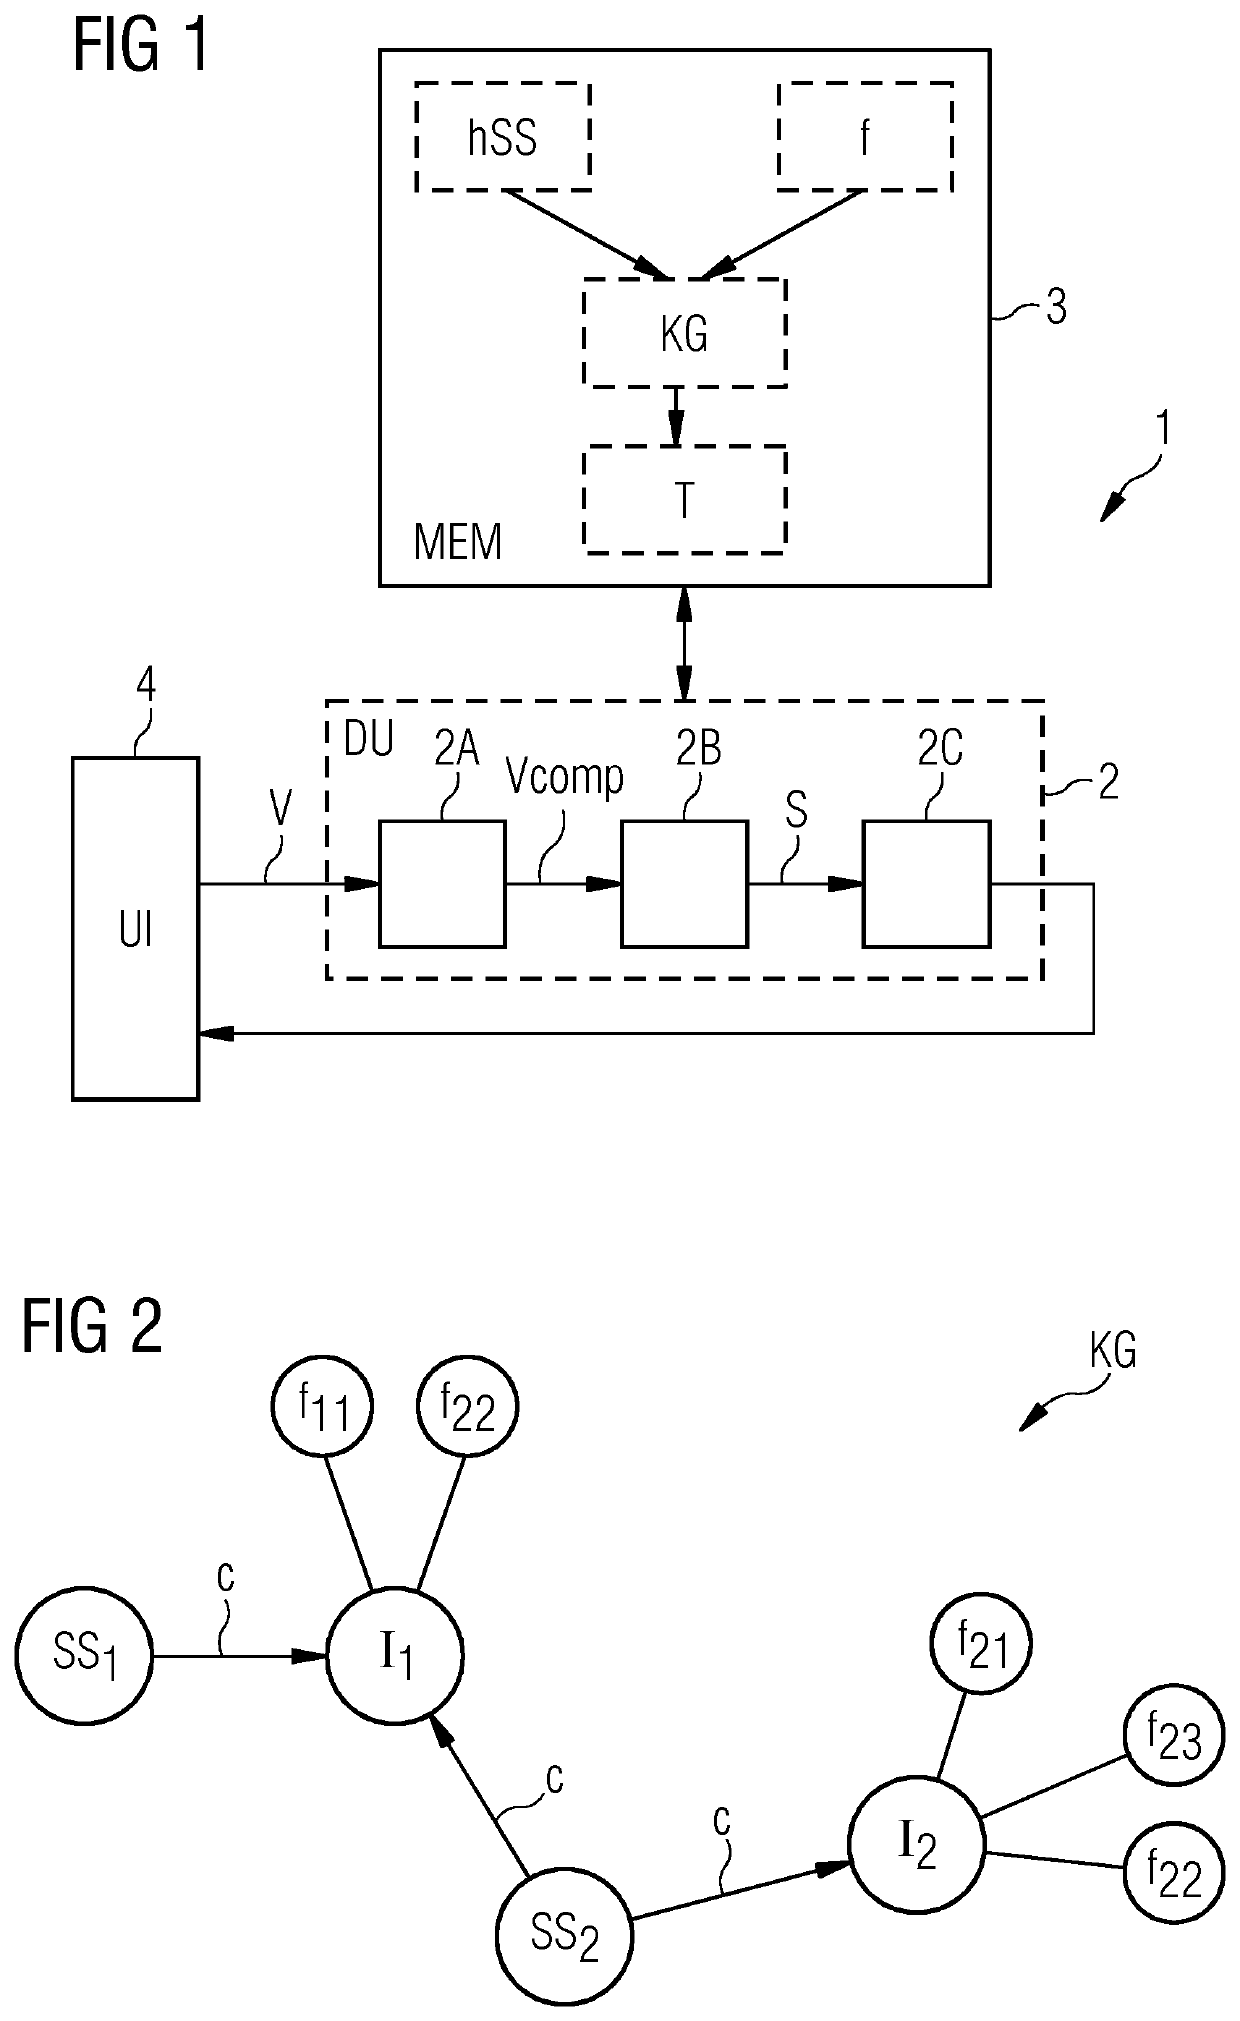 Platform for selection of items used for the configuration of an industrial system